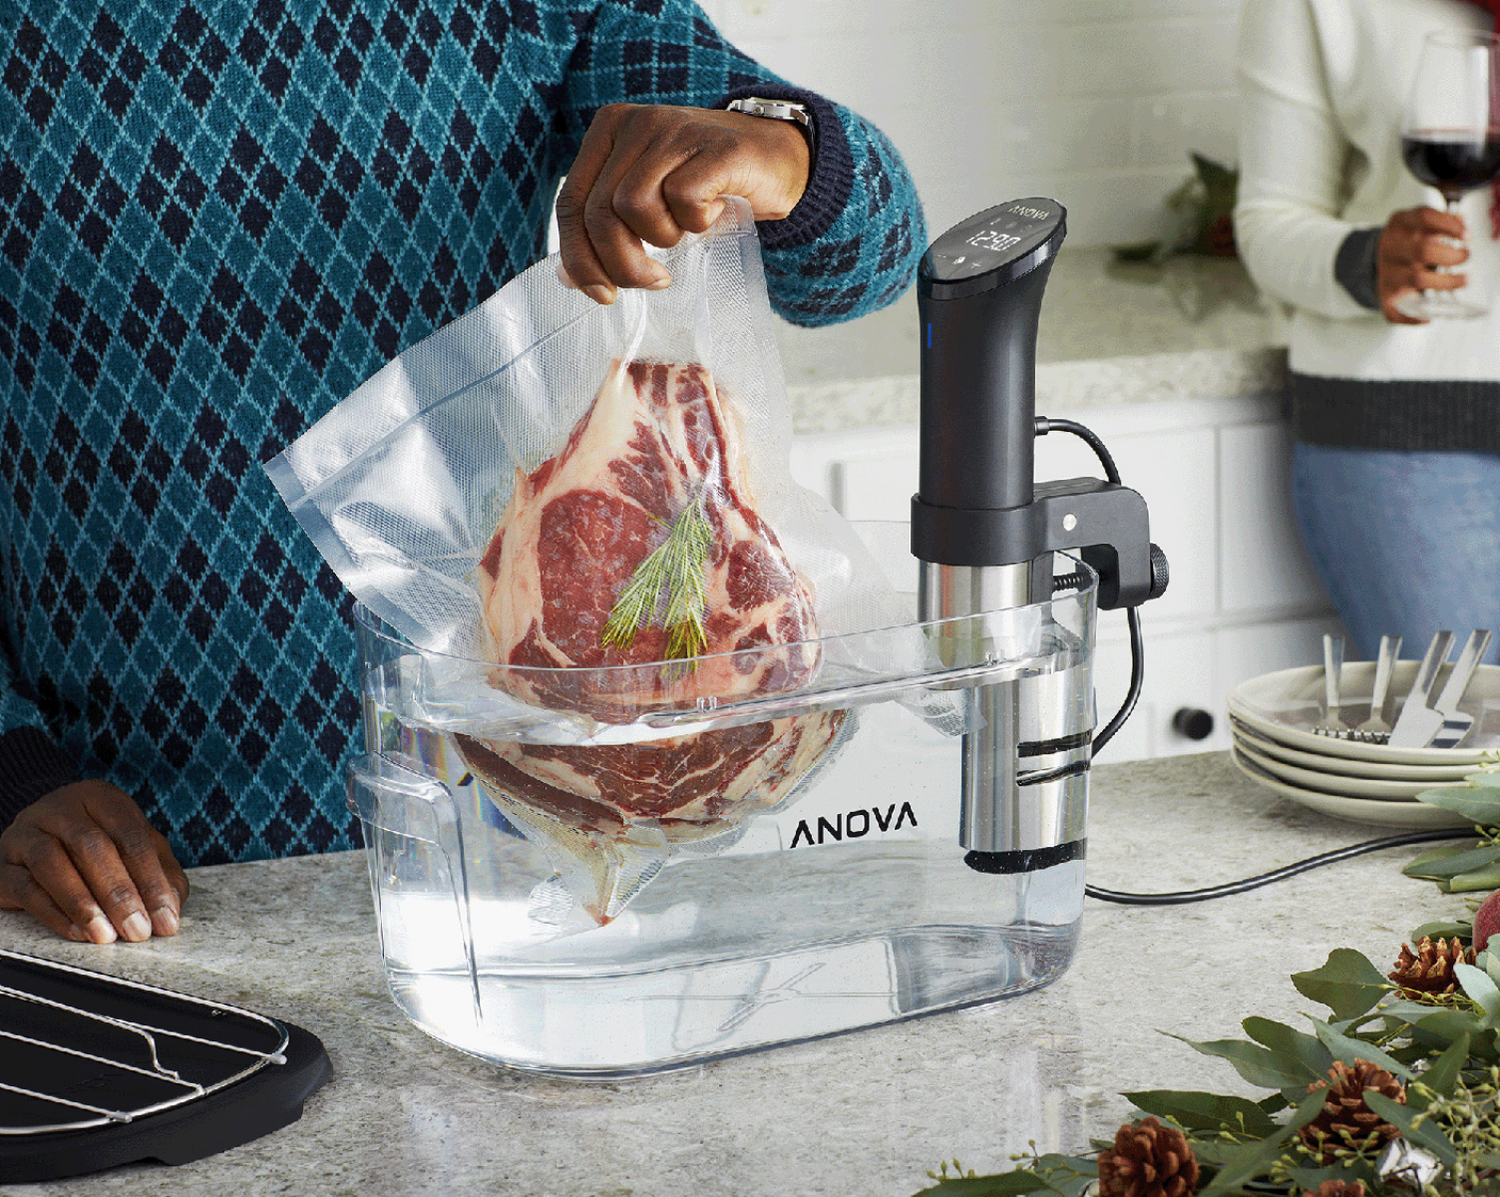 What is sous vide and where does the cooking process come from?